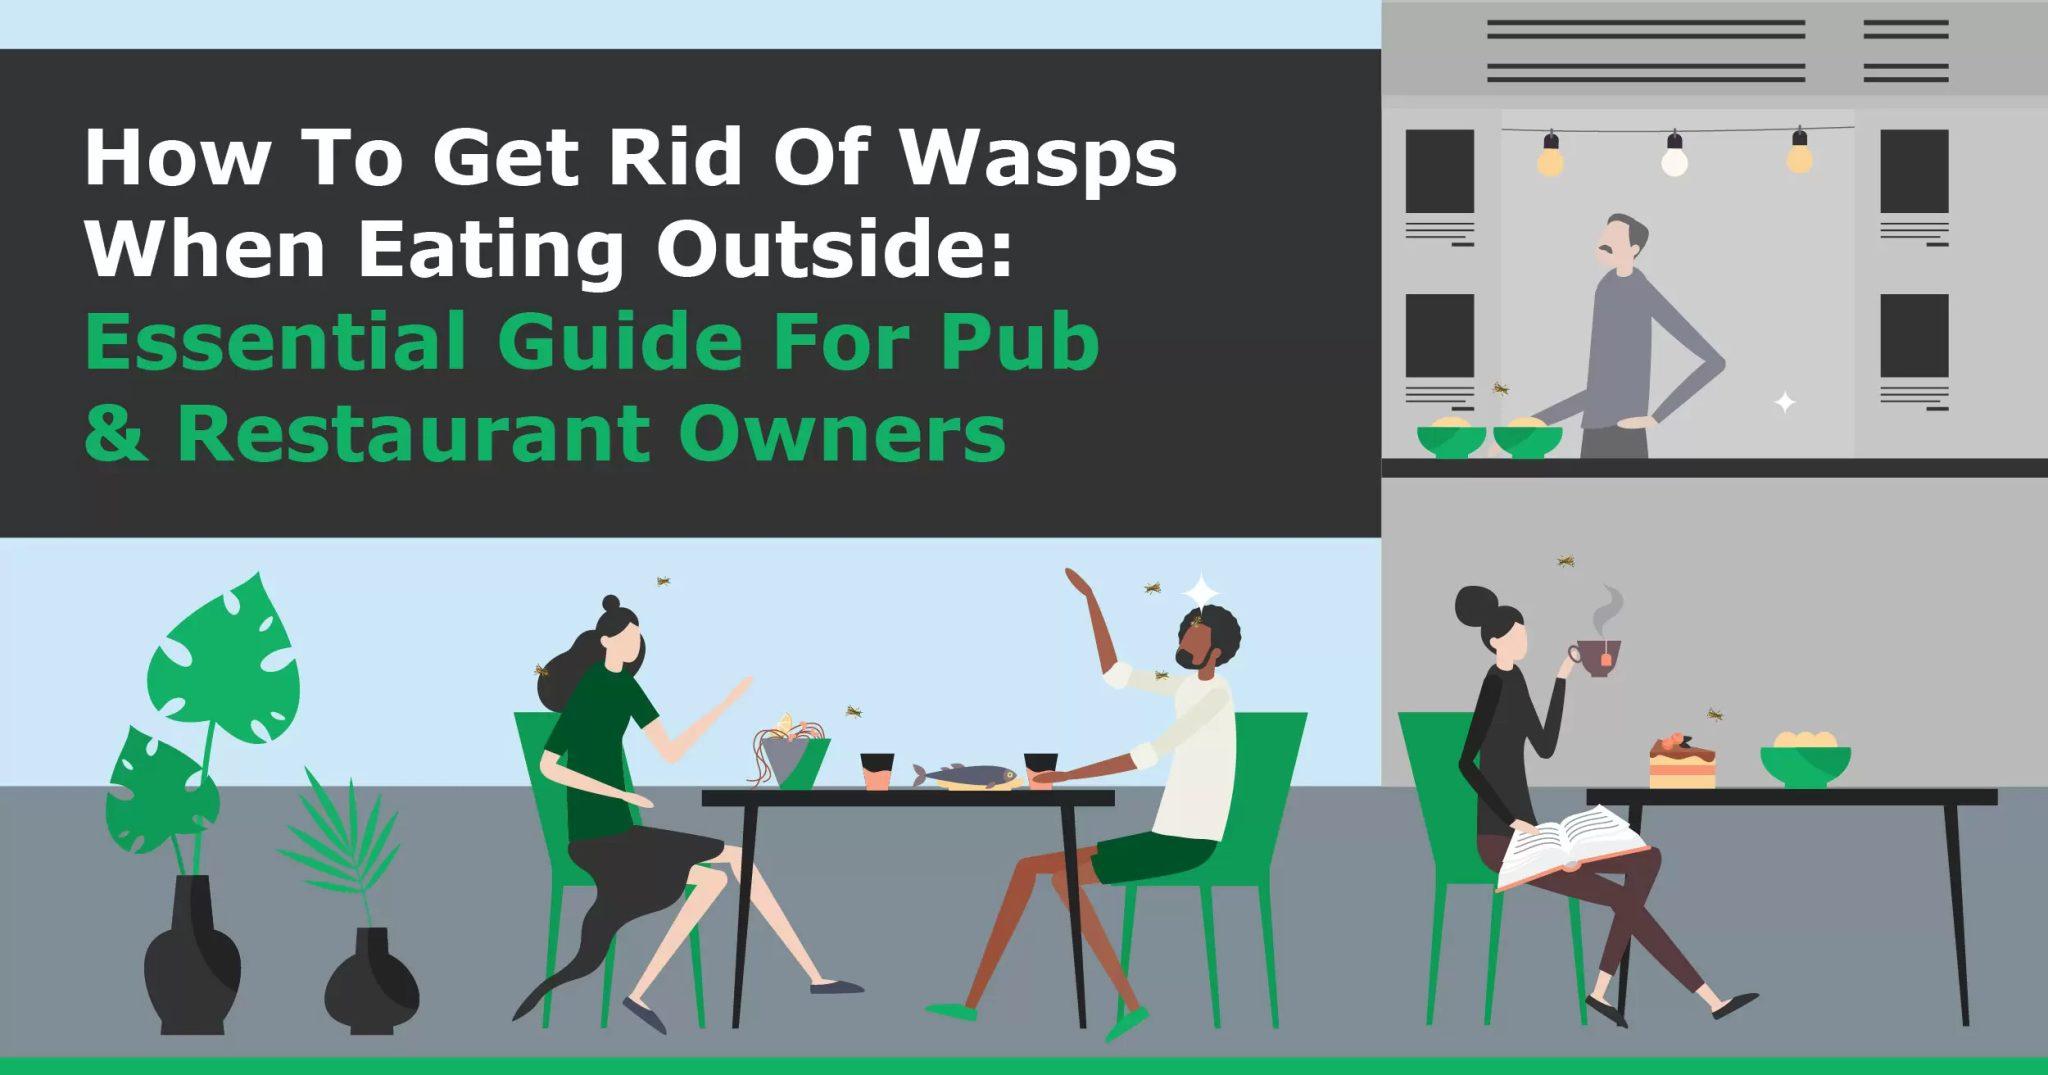 How to get rid of wasps when eating outside